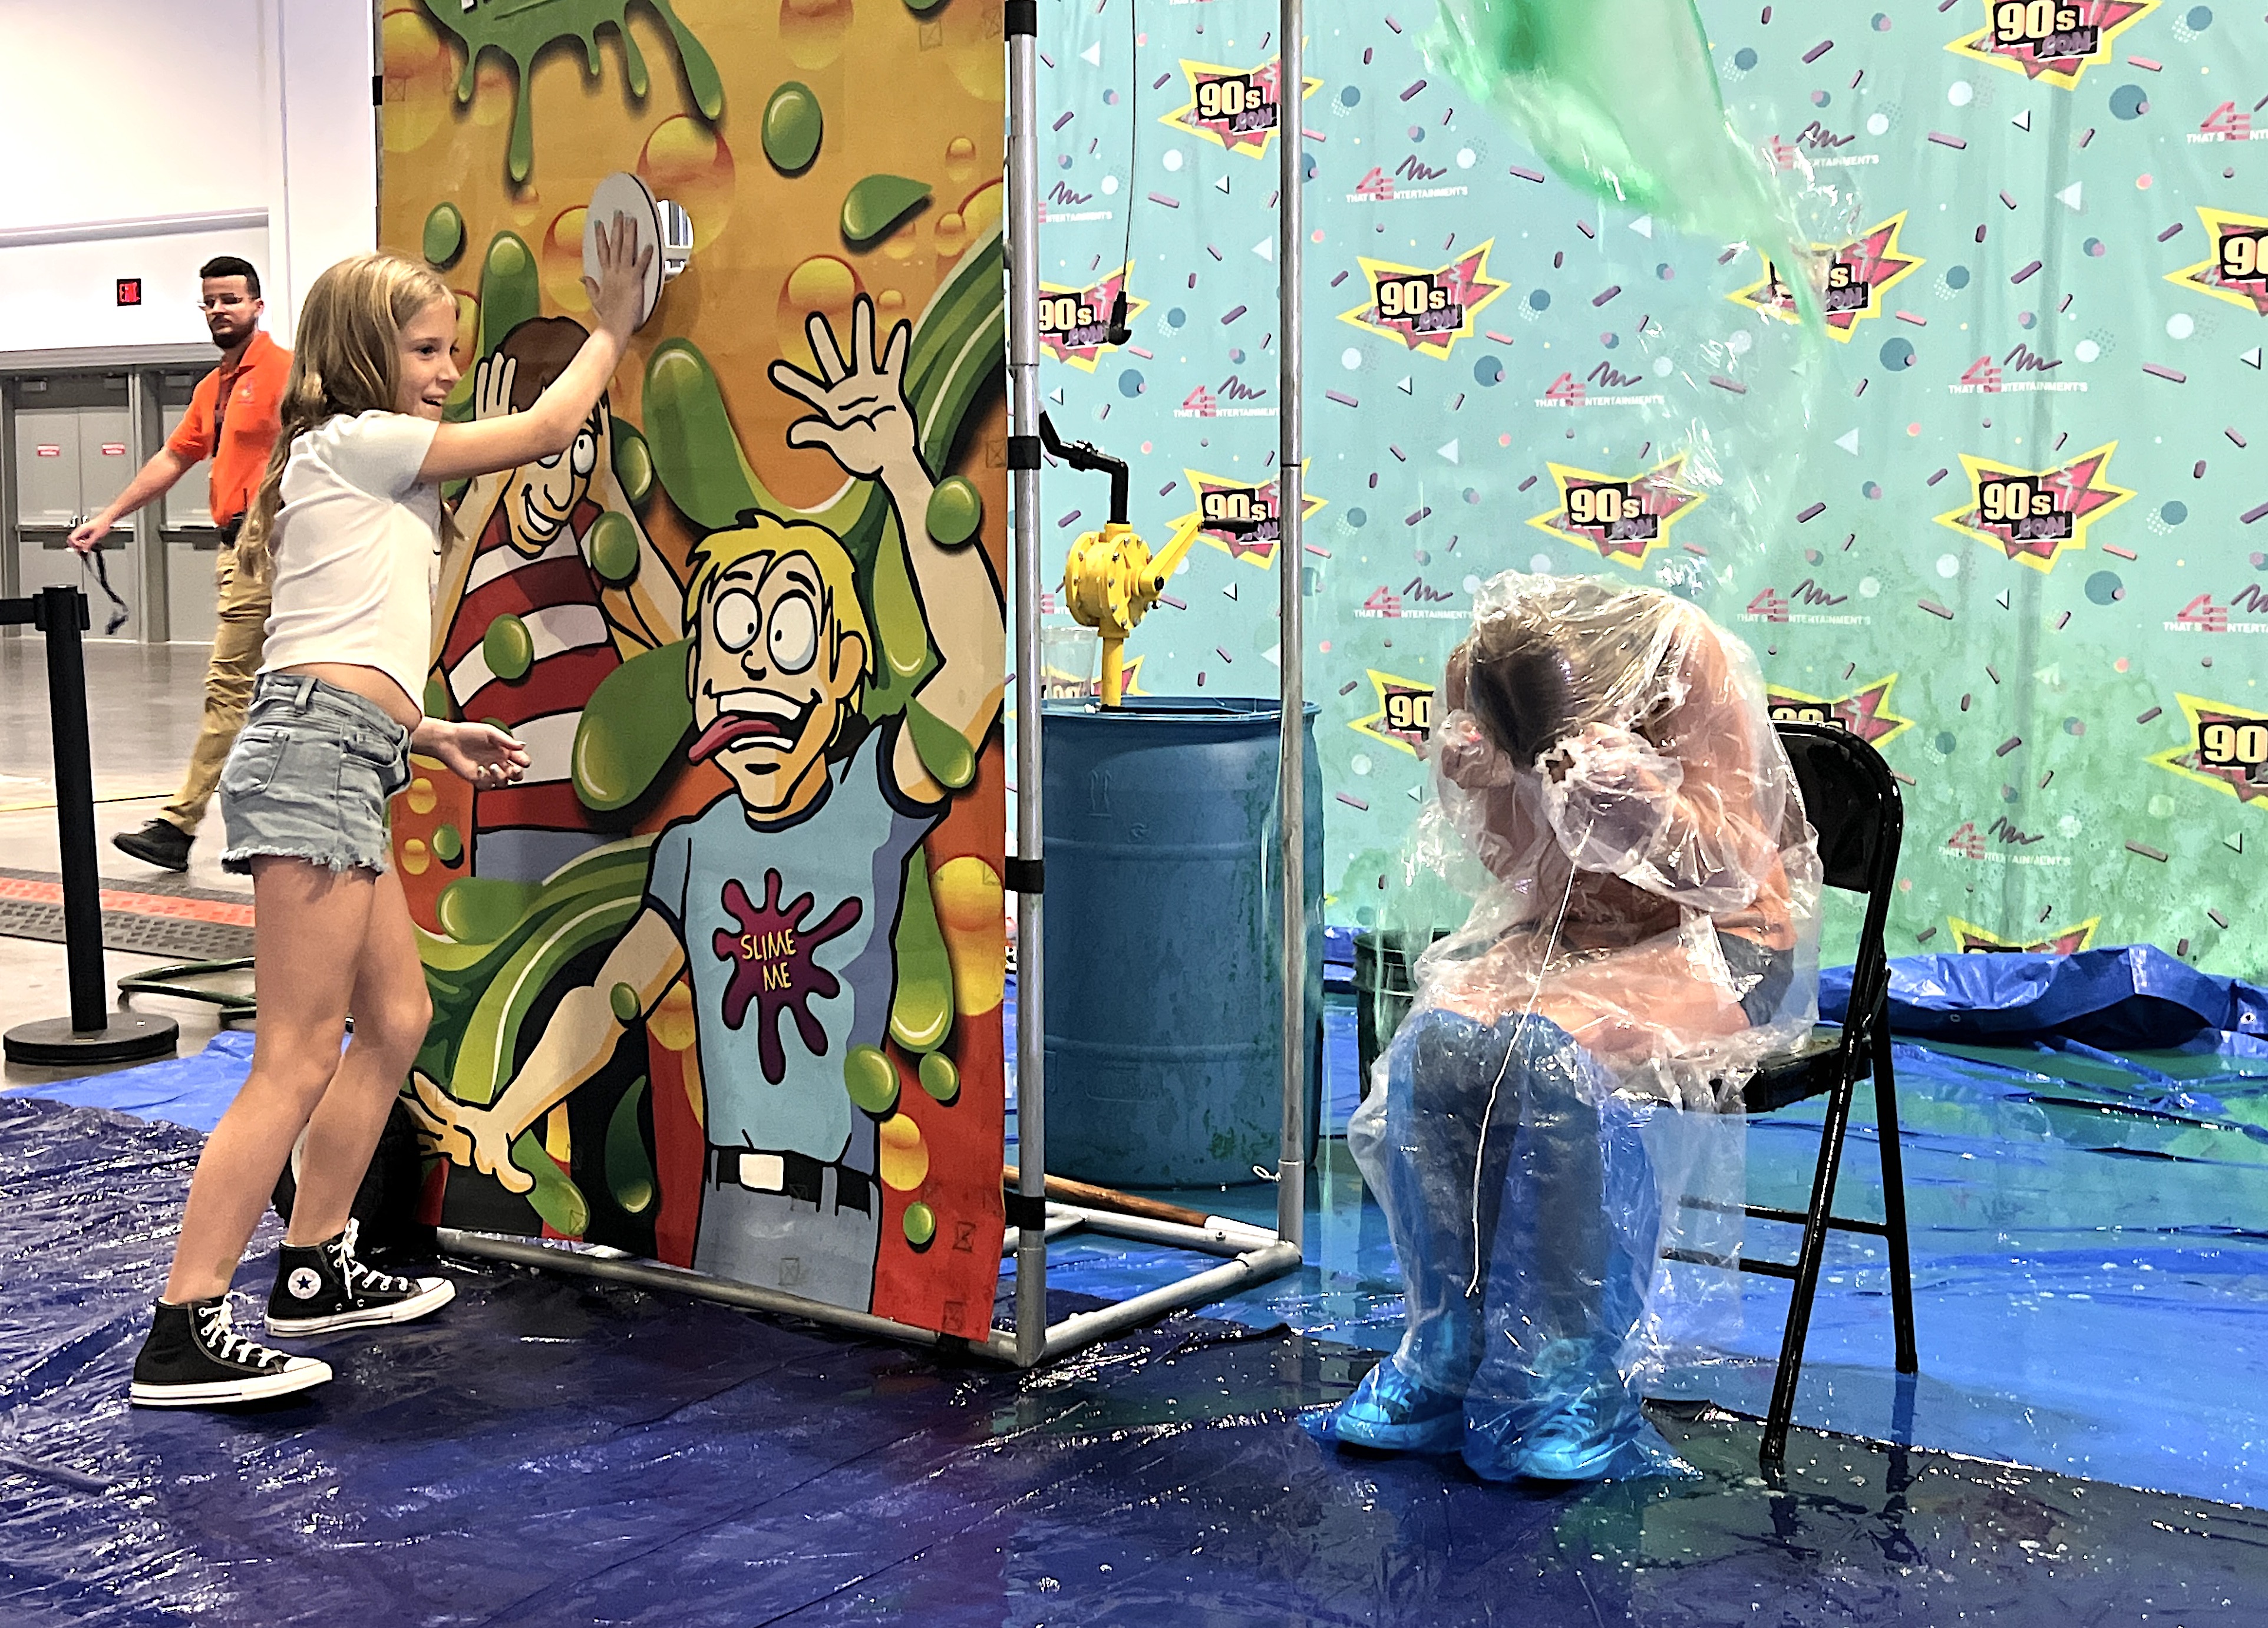 Rylan Townsend, 9, presses a button to drop "slime" on her sister Raegan Townsend, 11, during 90s Con at the Tampa Convention Center on Sunday, Sept. 17, 2023.